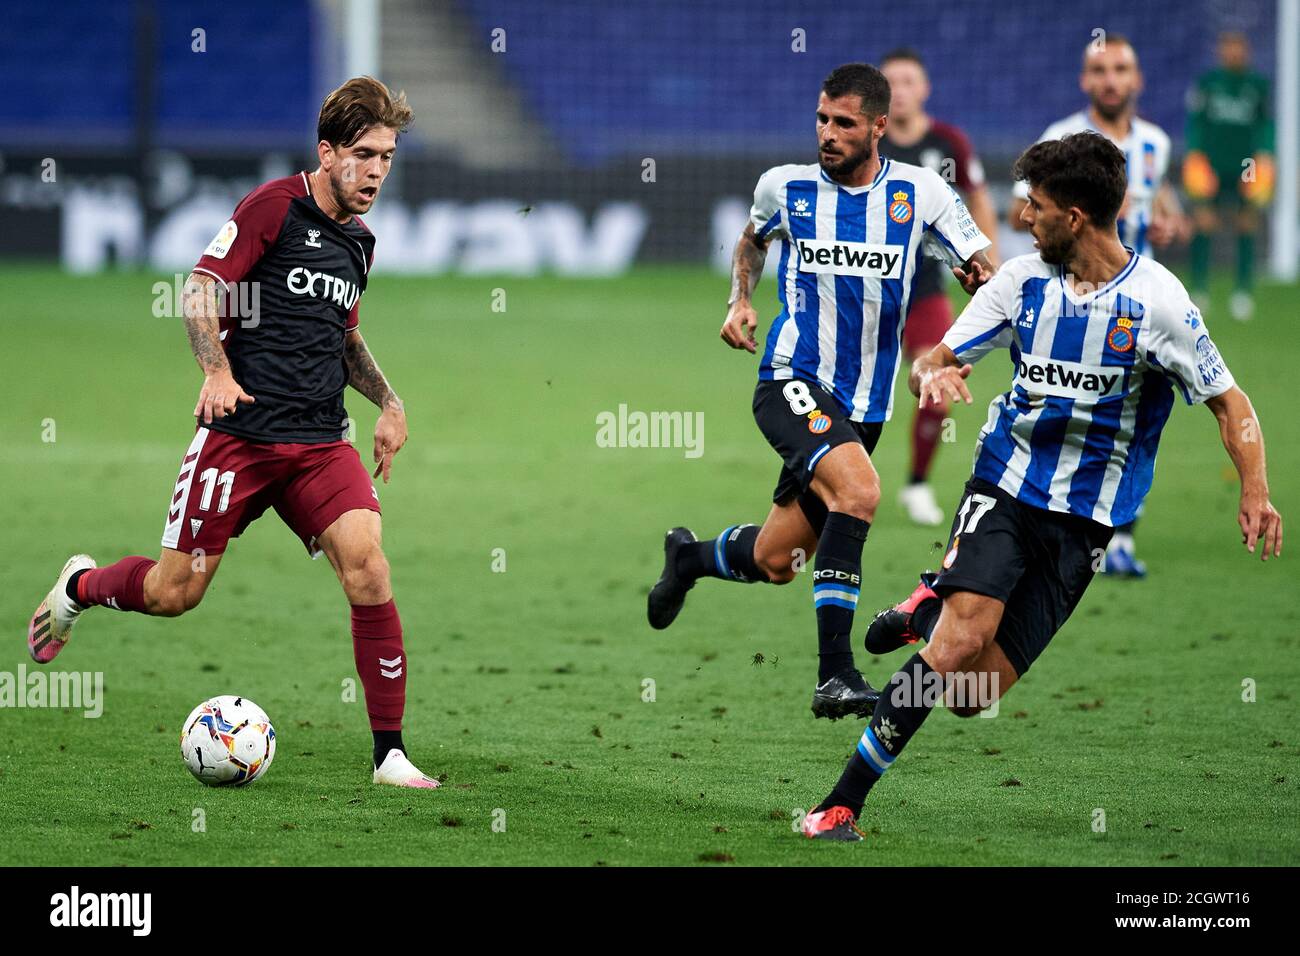 Barcelona, Spain. 12th Sep, 2020. Jimenez during the Liga SmartBank match between RCD Espanyol and vs Albacete Balompie at RCD Stadium on September 12, 2020 in Barcelona, Spain. Credit: Dax Images/Alamy Live News Stock Photo